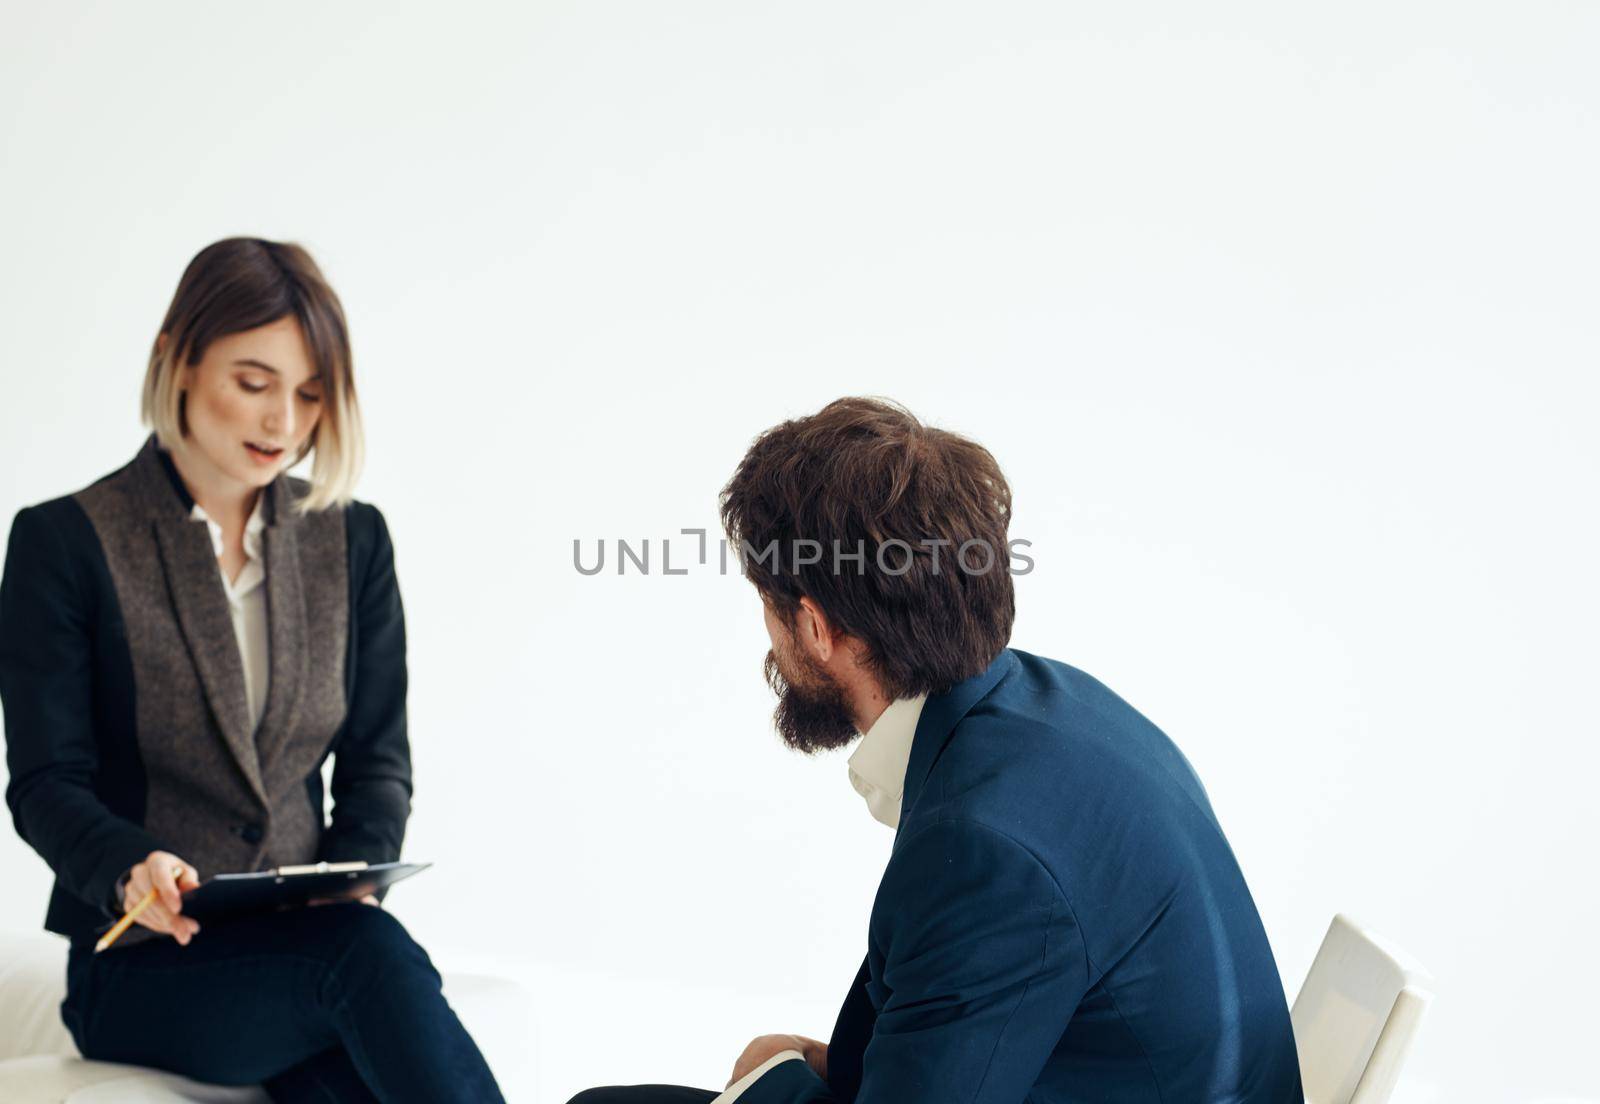 A man in a blue jacket sits opposite a woman in a suit on a light background indoors. High quality photo